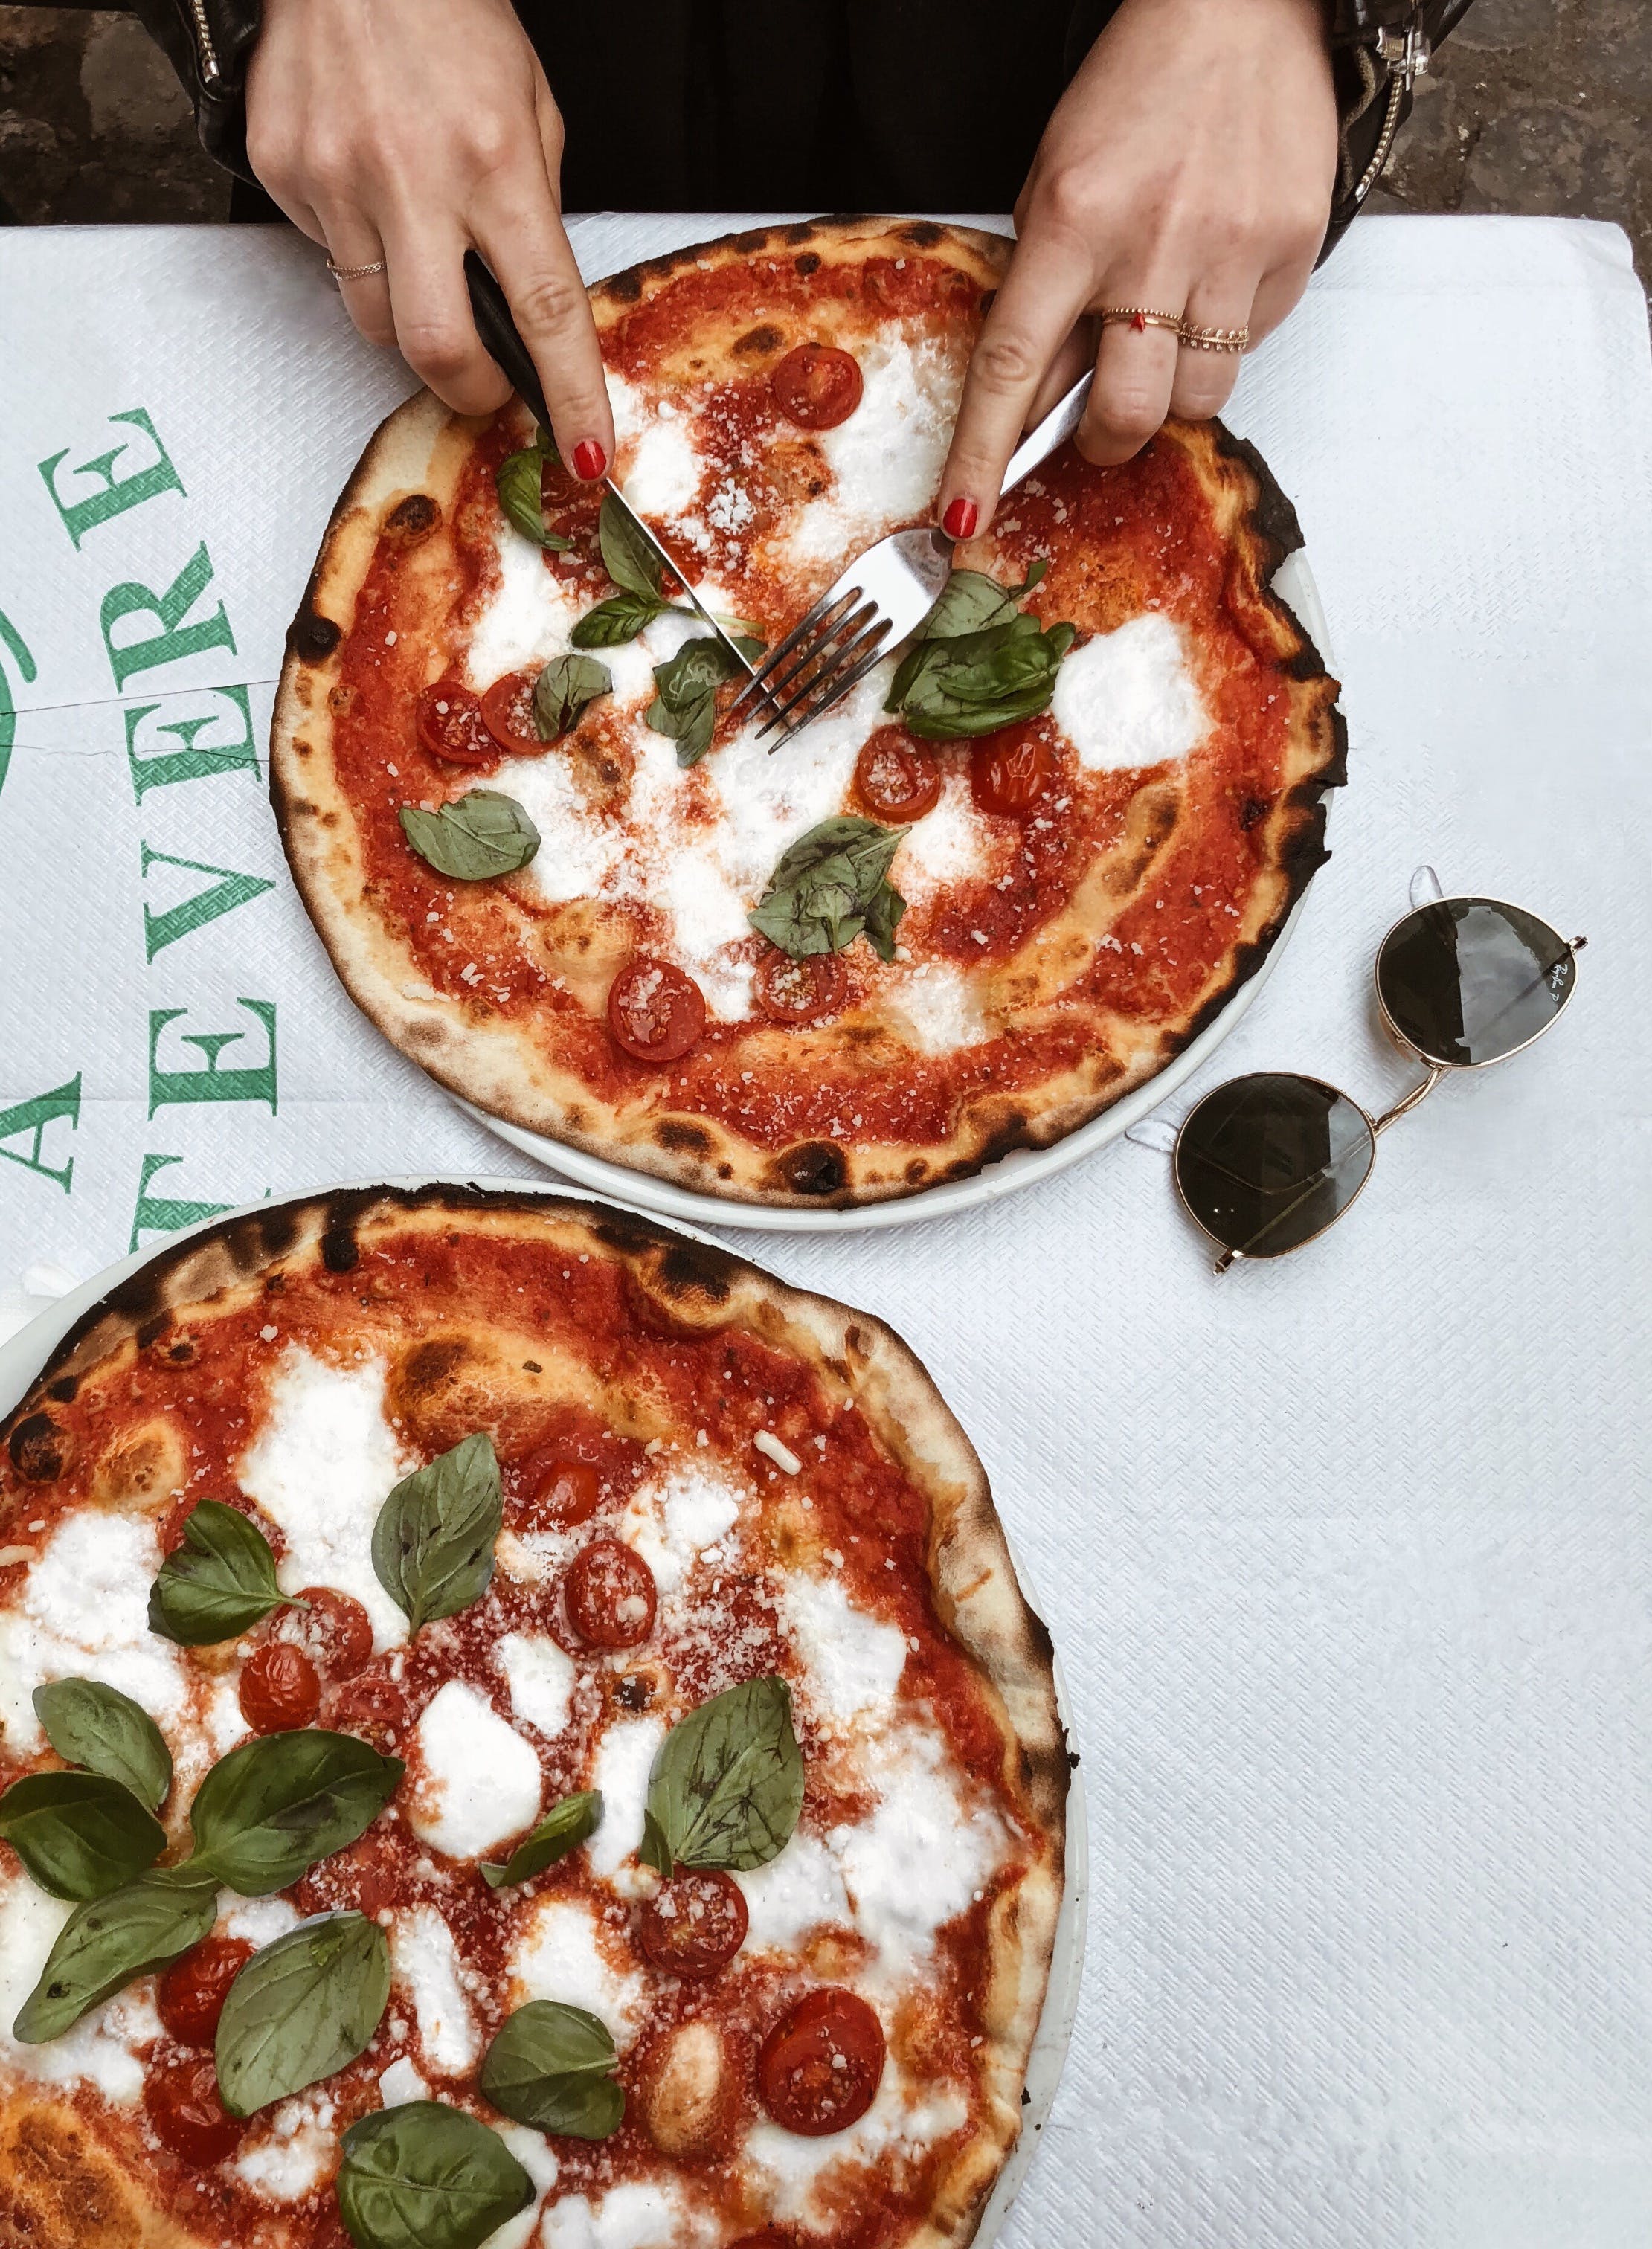 A person savoring two entire pizzas | Source: Pexels